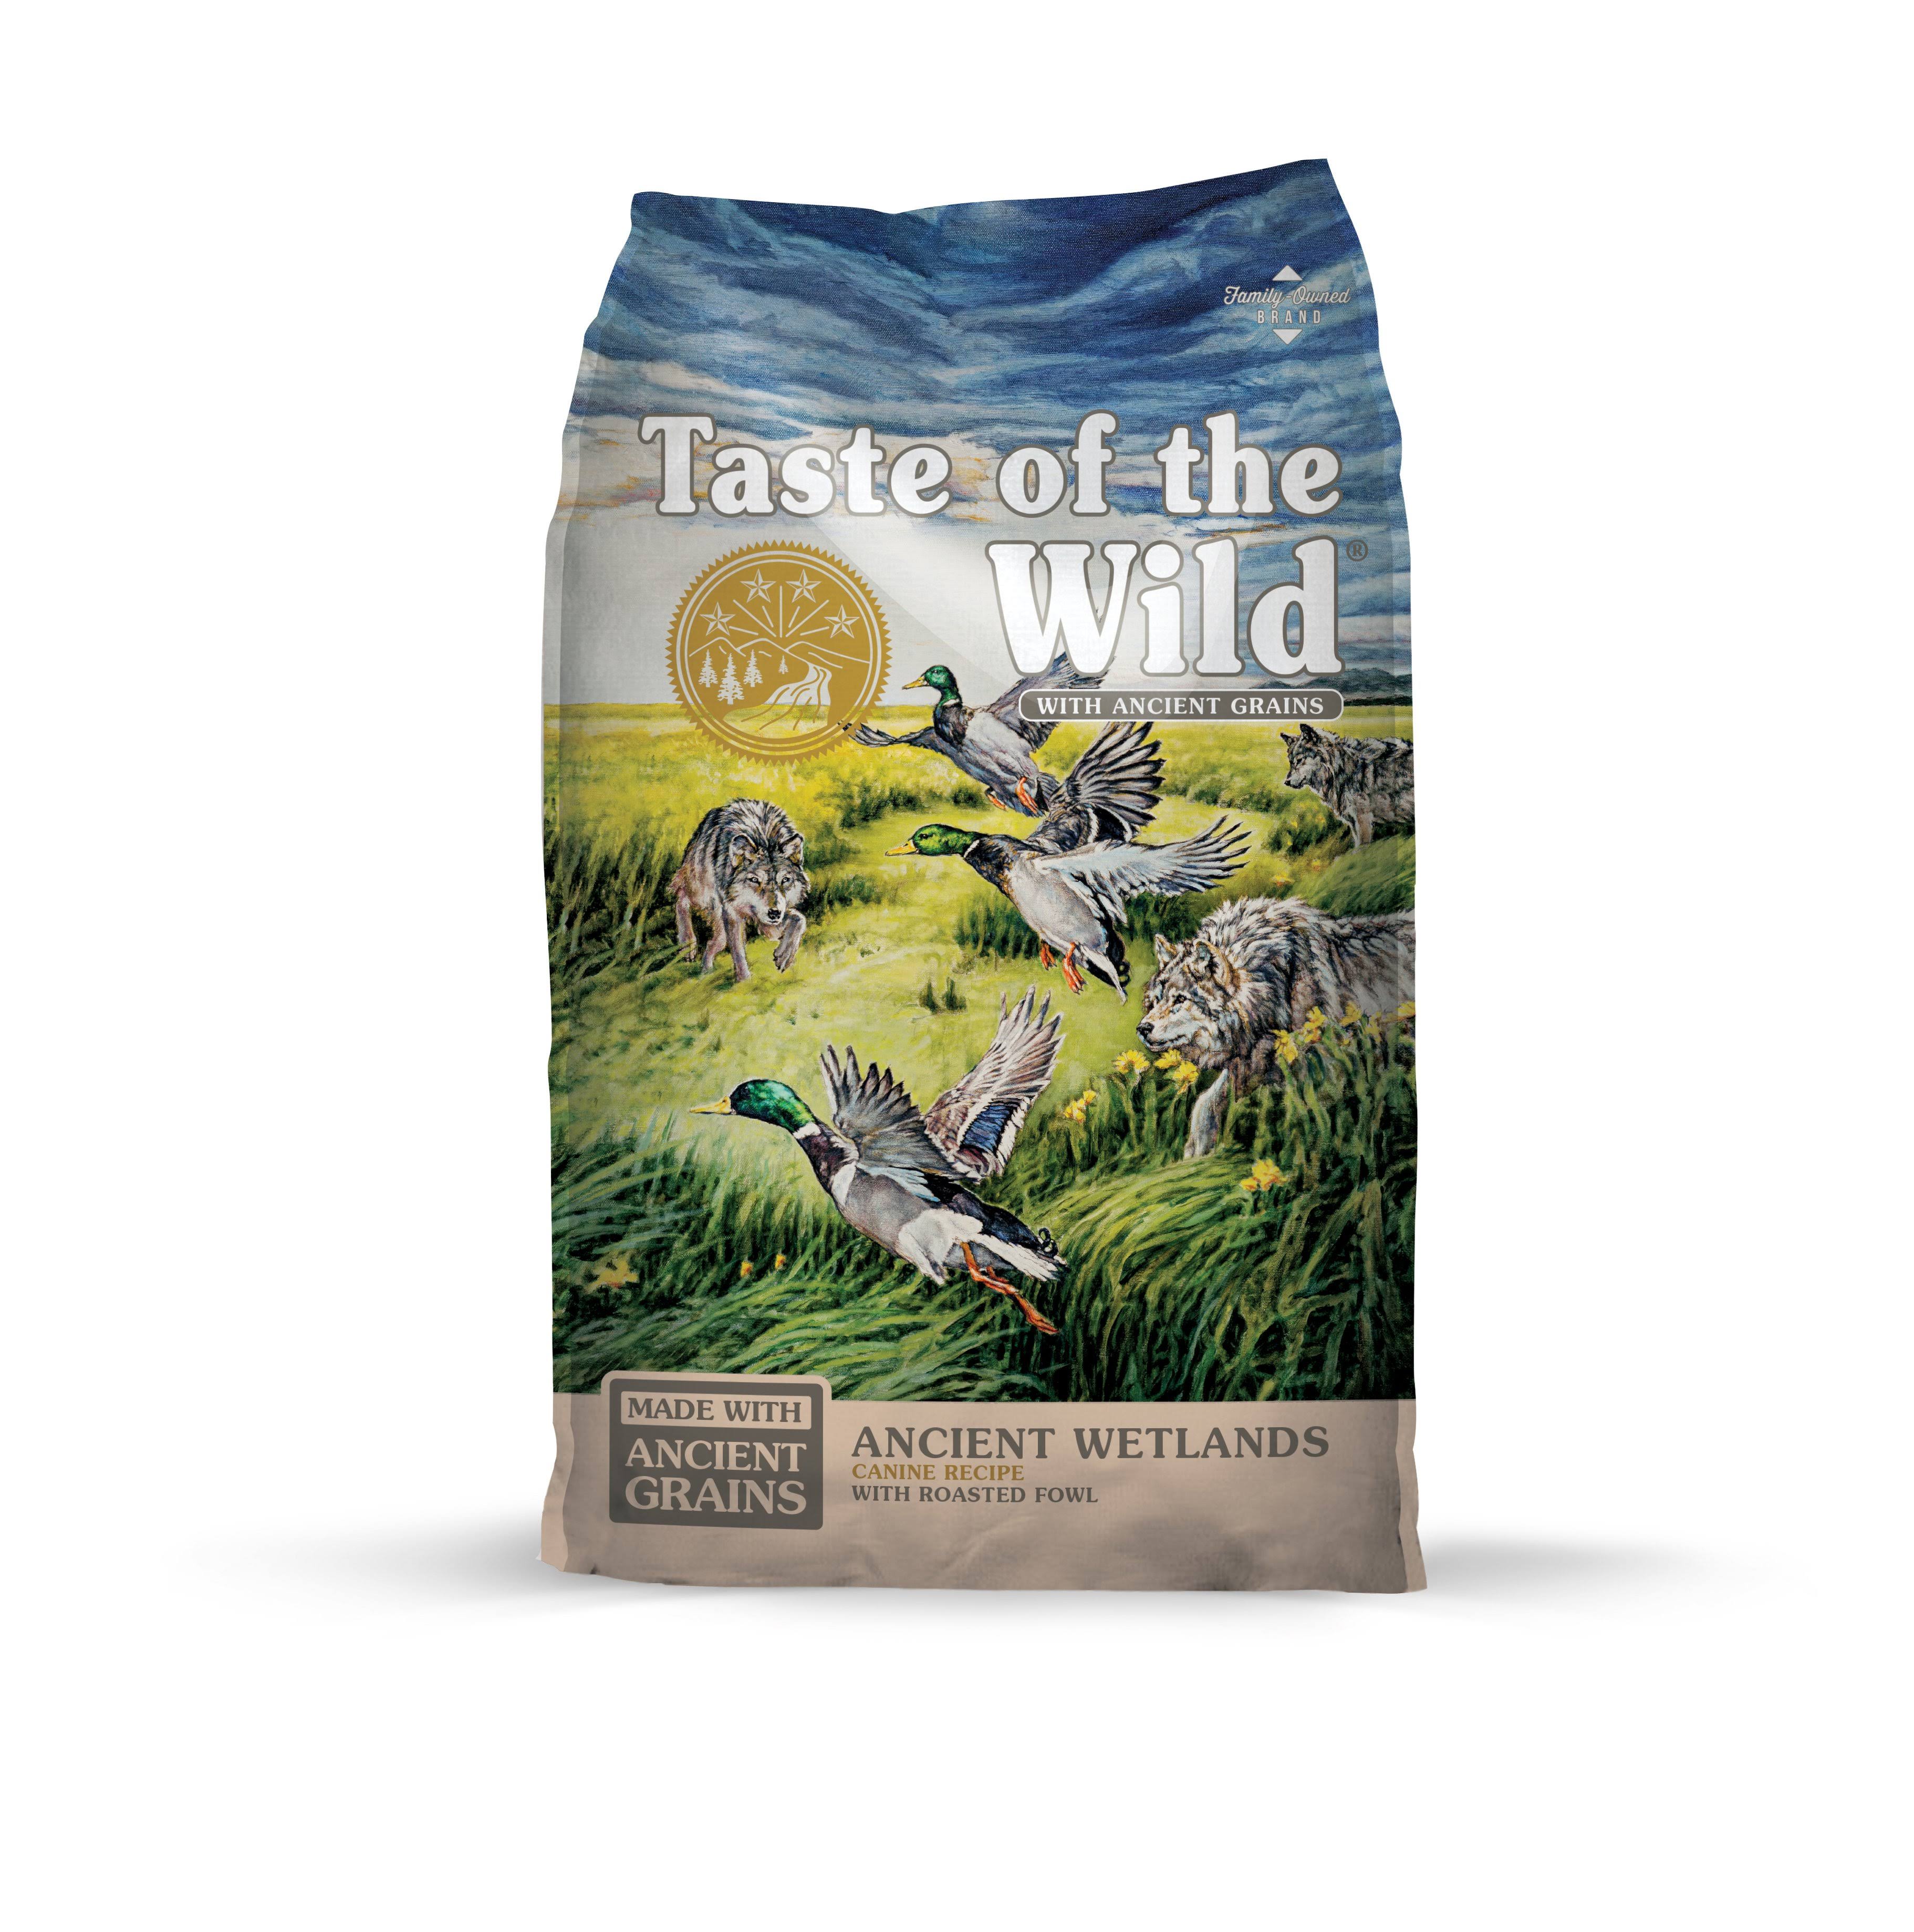 Taste of The Wild Ancient Wetlands with Roasted Fowl Dog Food 14 lbs